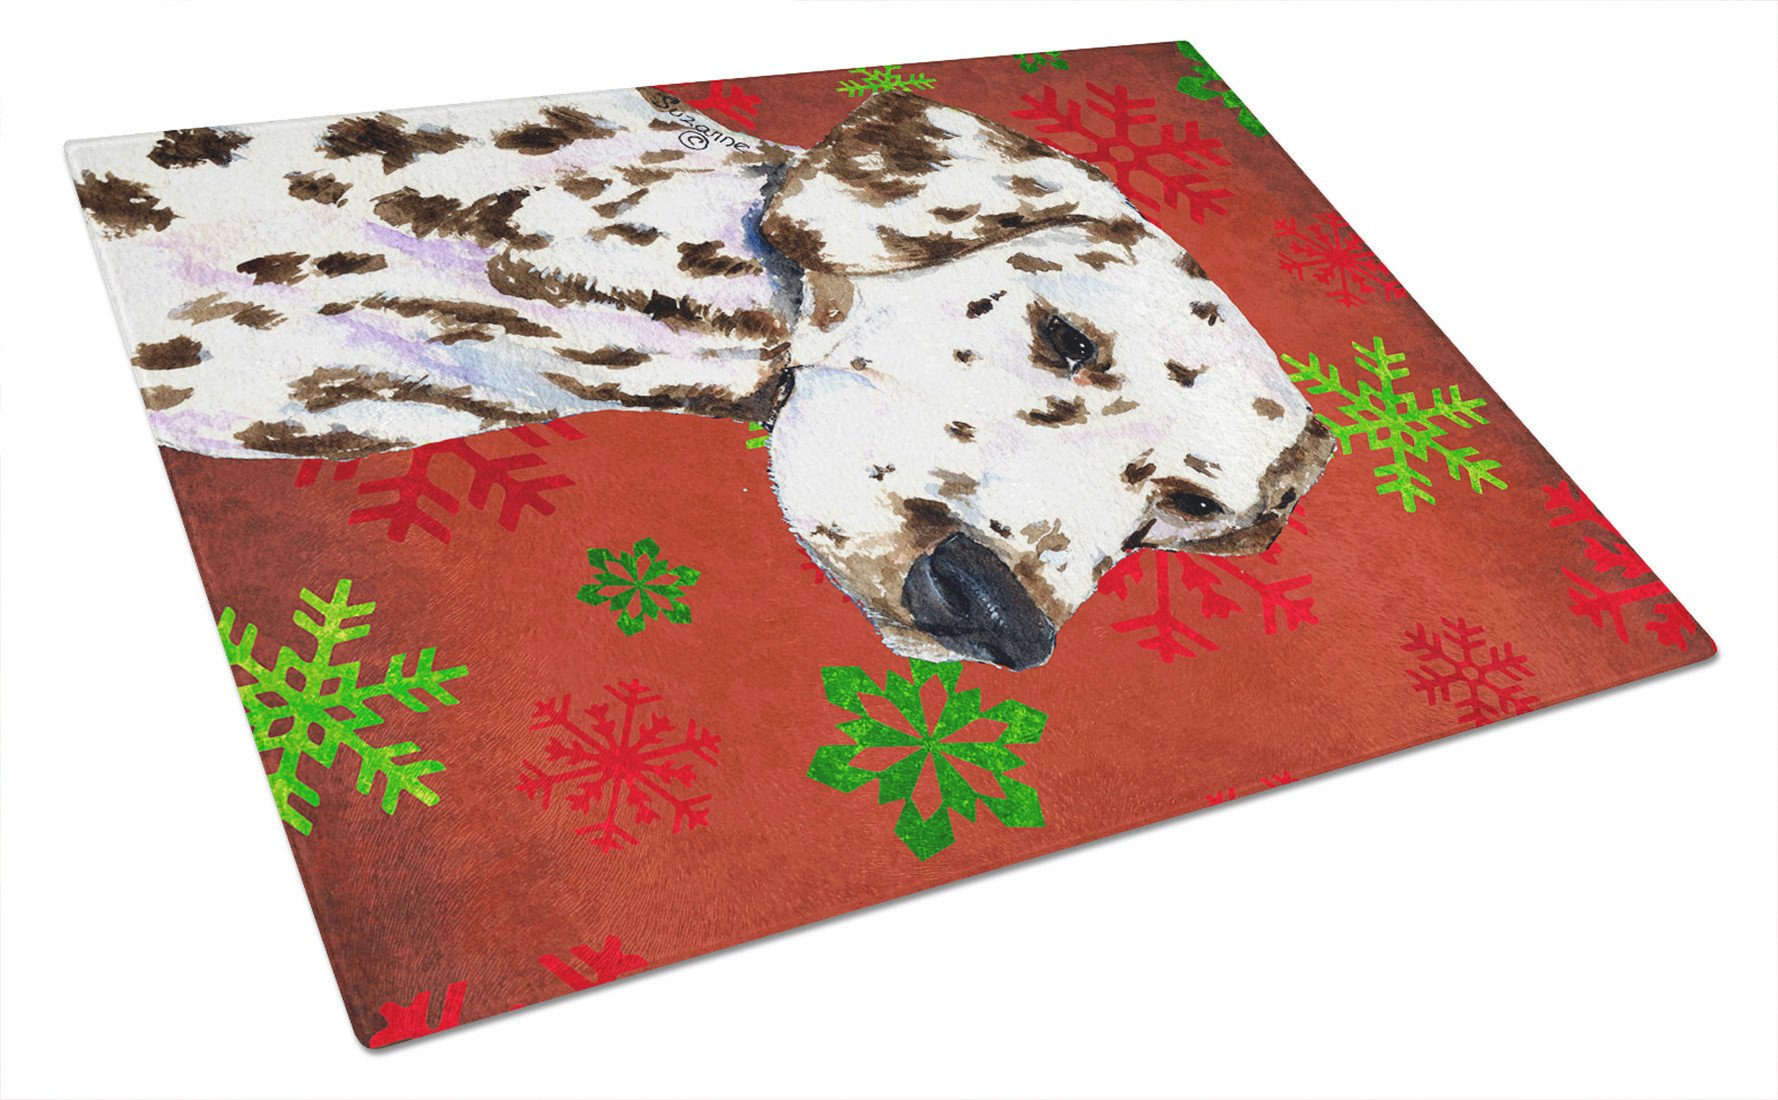 Dalmatian Red and Green Snowflakes Holiday Christmas Glass Cutting Board Large by Caroline's Treasures